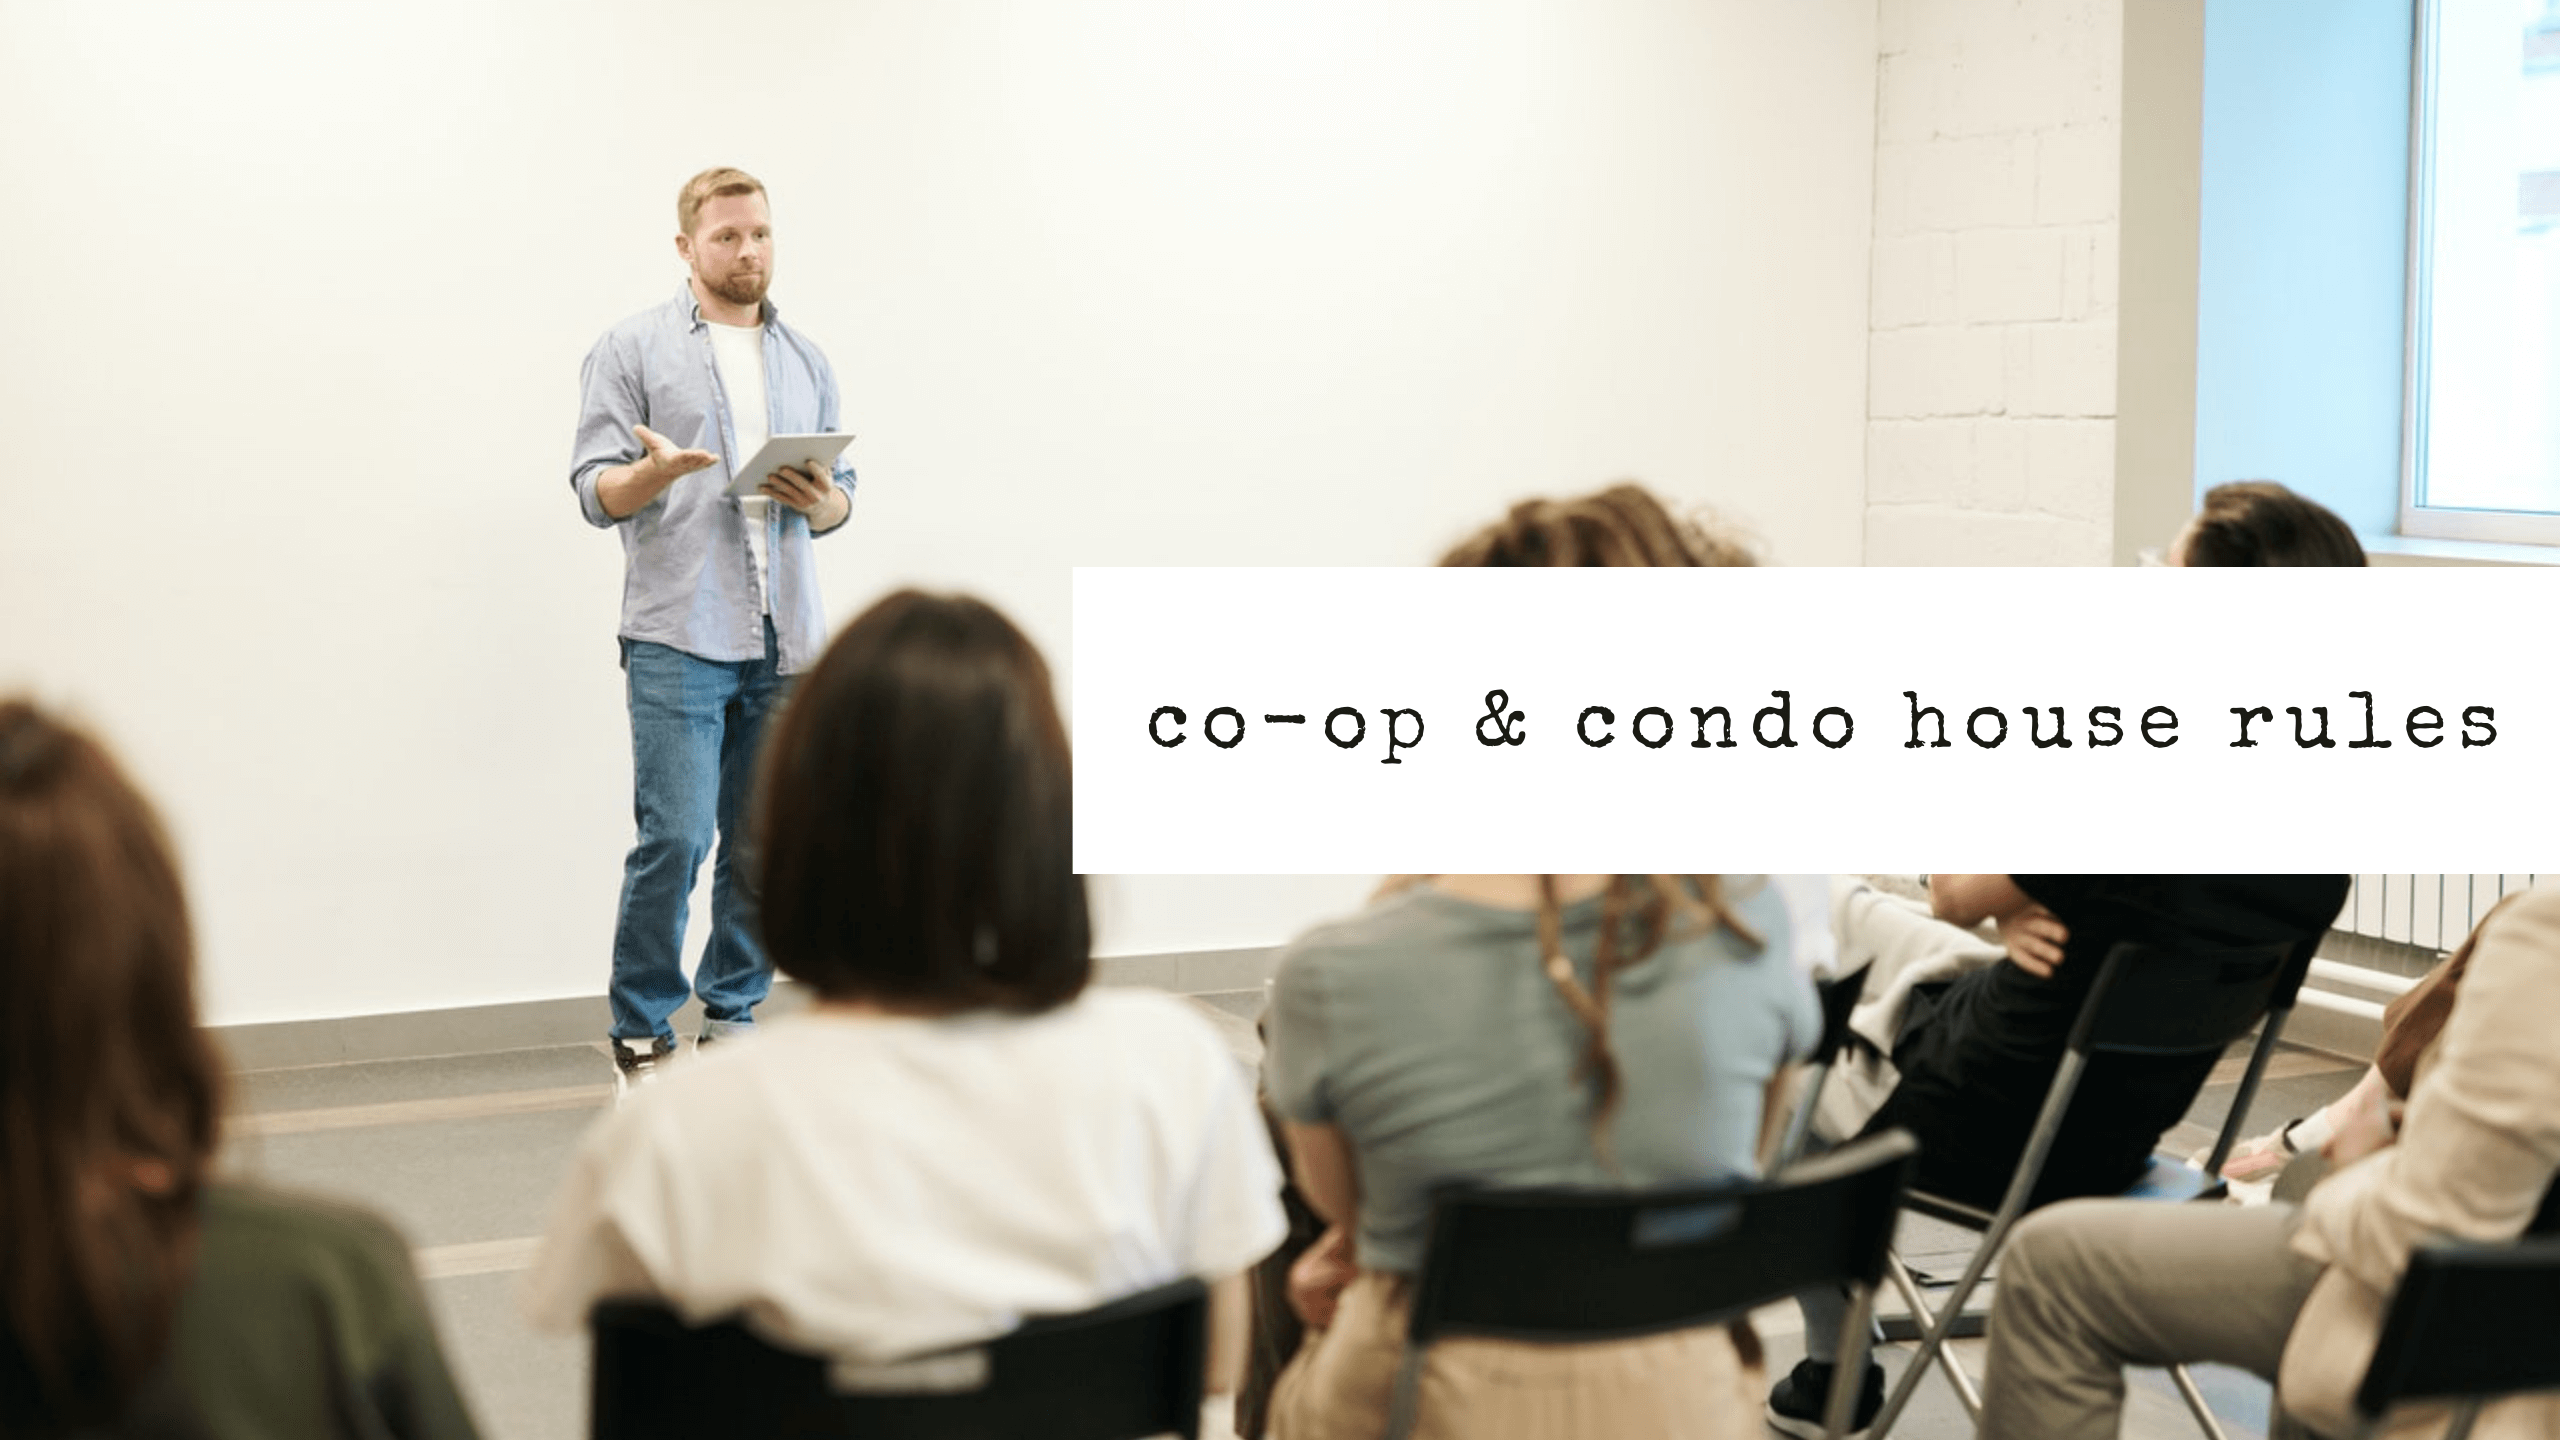 Harlem Co-op & Condo House Rules: What Unit Owners Need to Know